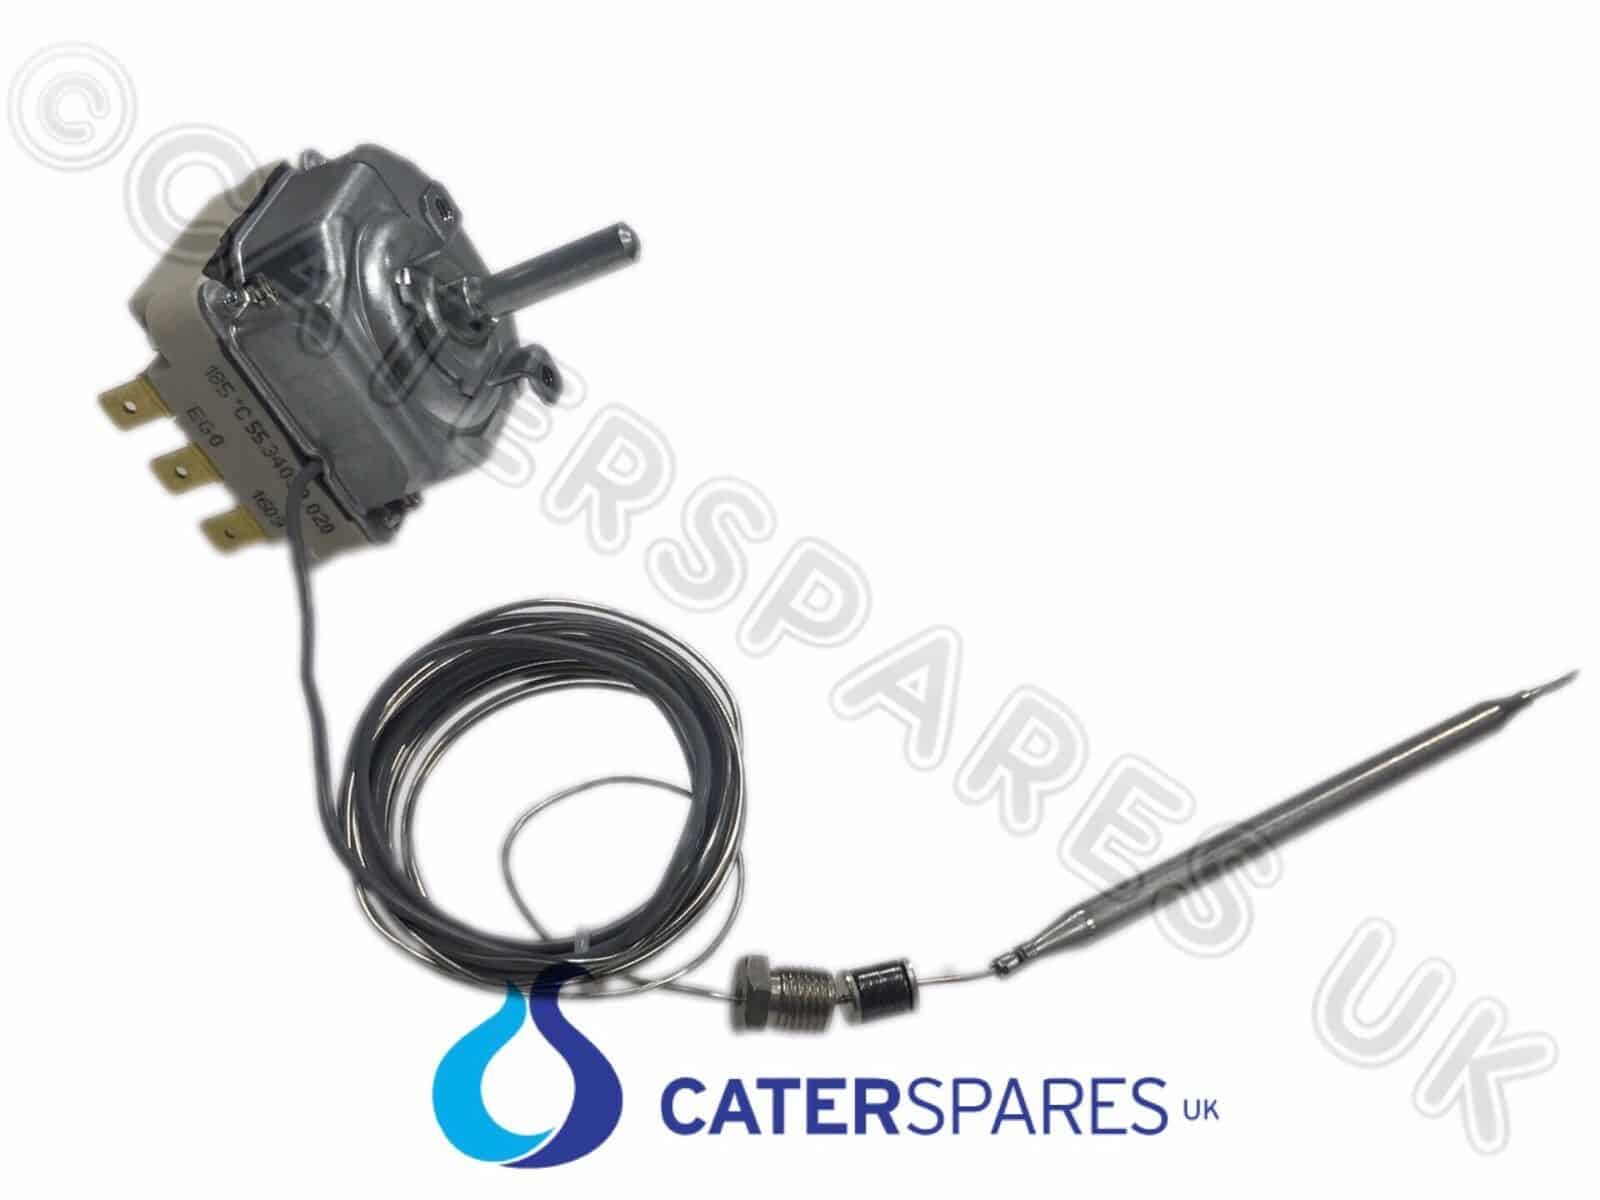 CHIP RANGE 30 AMP CAPILLARY THERMOSTAT FISH RANGE FRYER EA520448 CATERING SPARES 